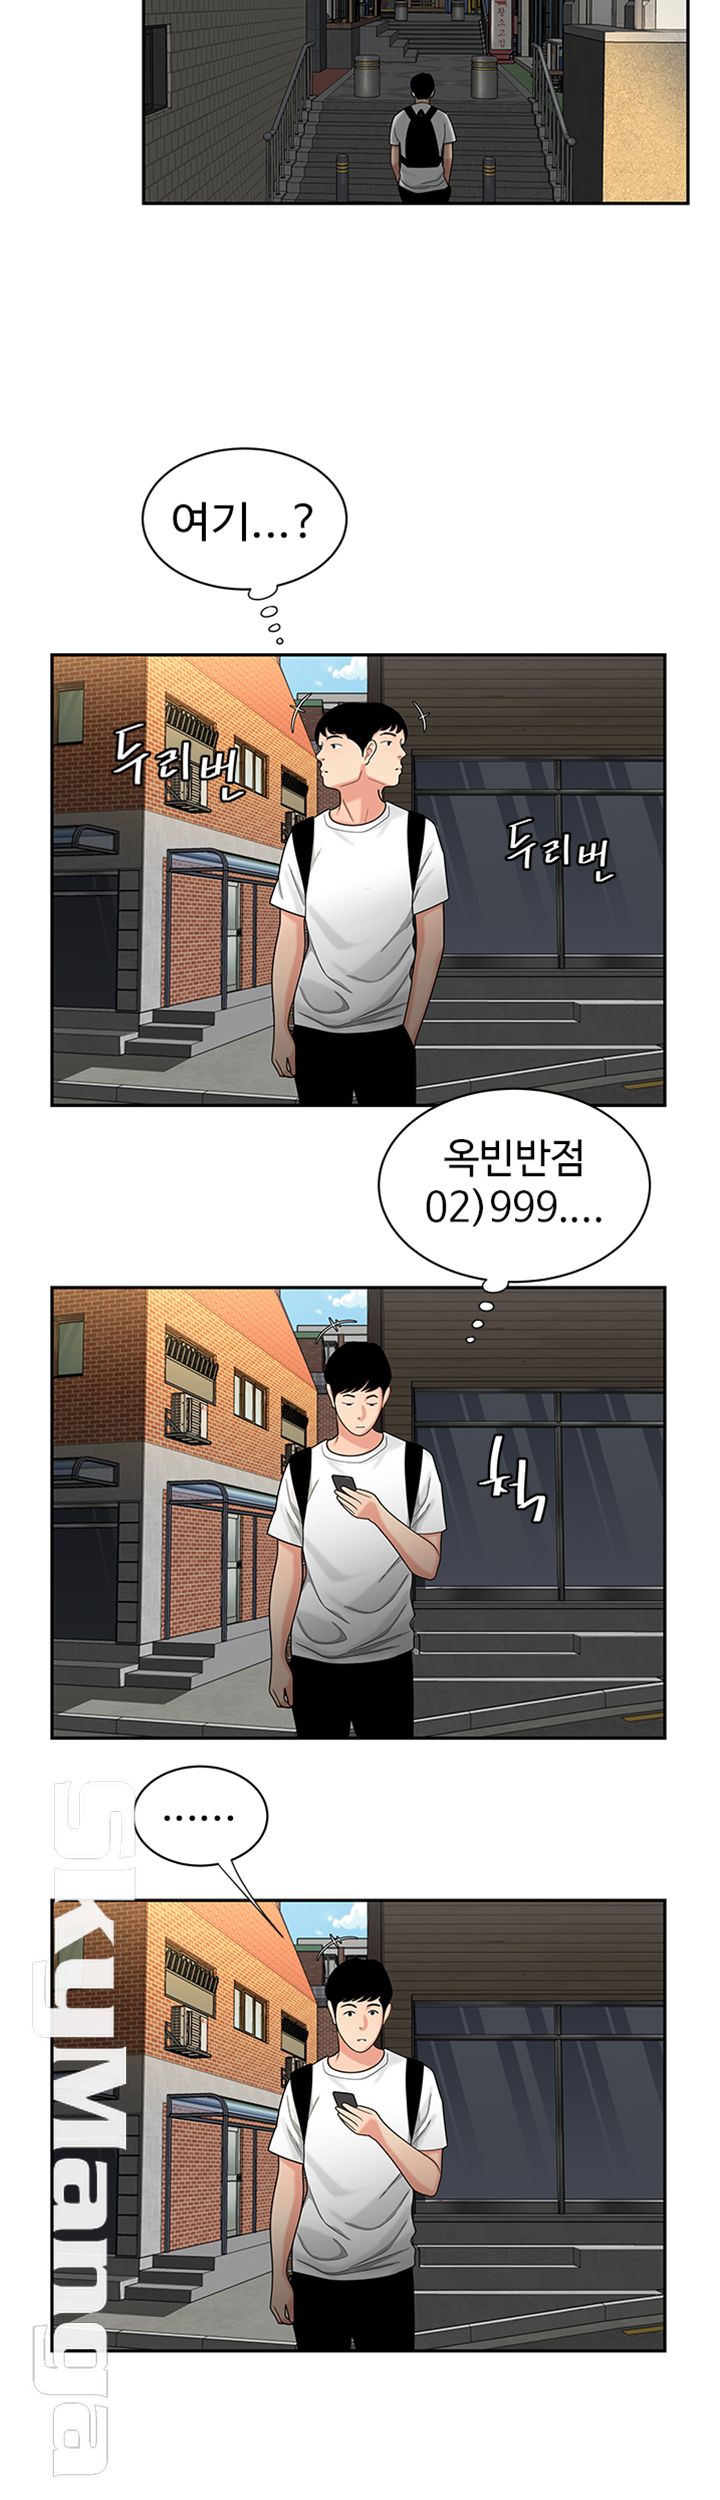 The Delivery Man Raw - Chapter 1 Page 2